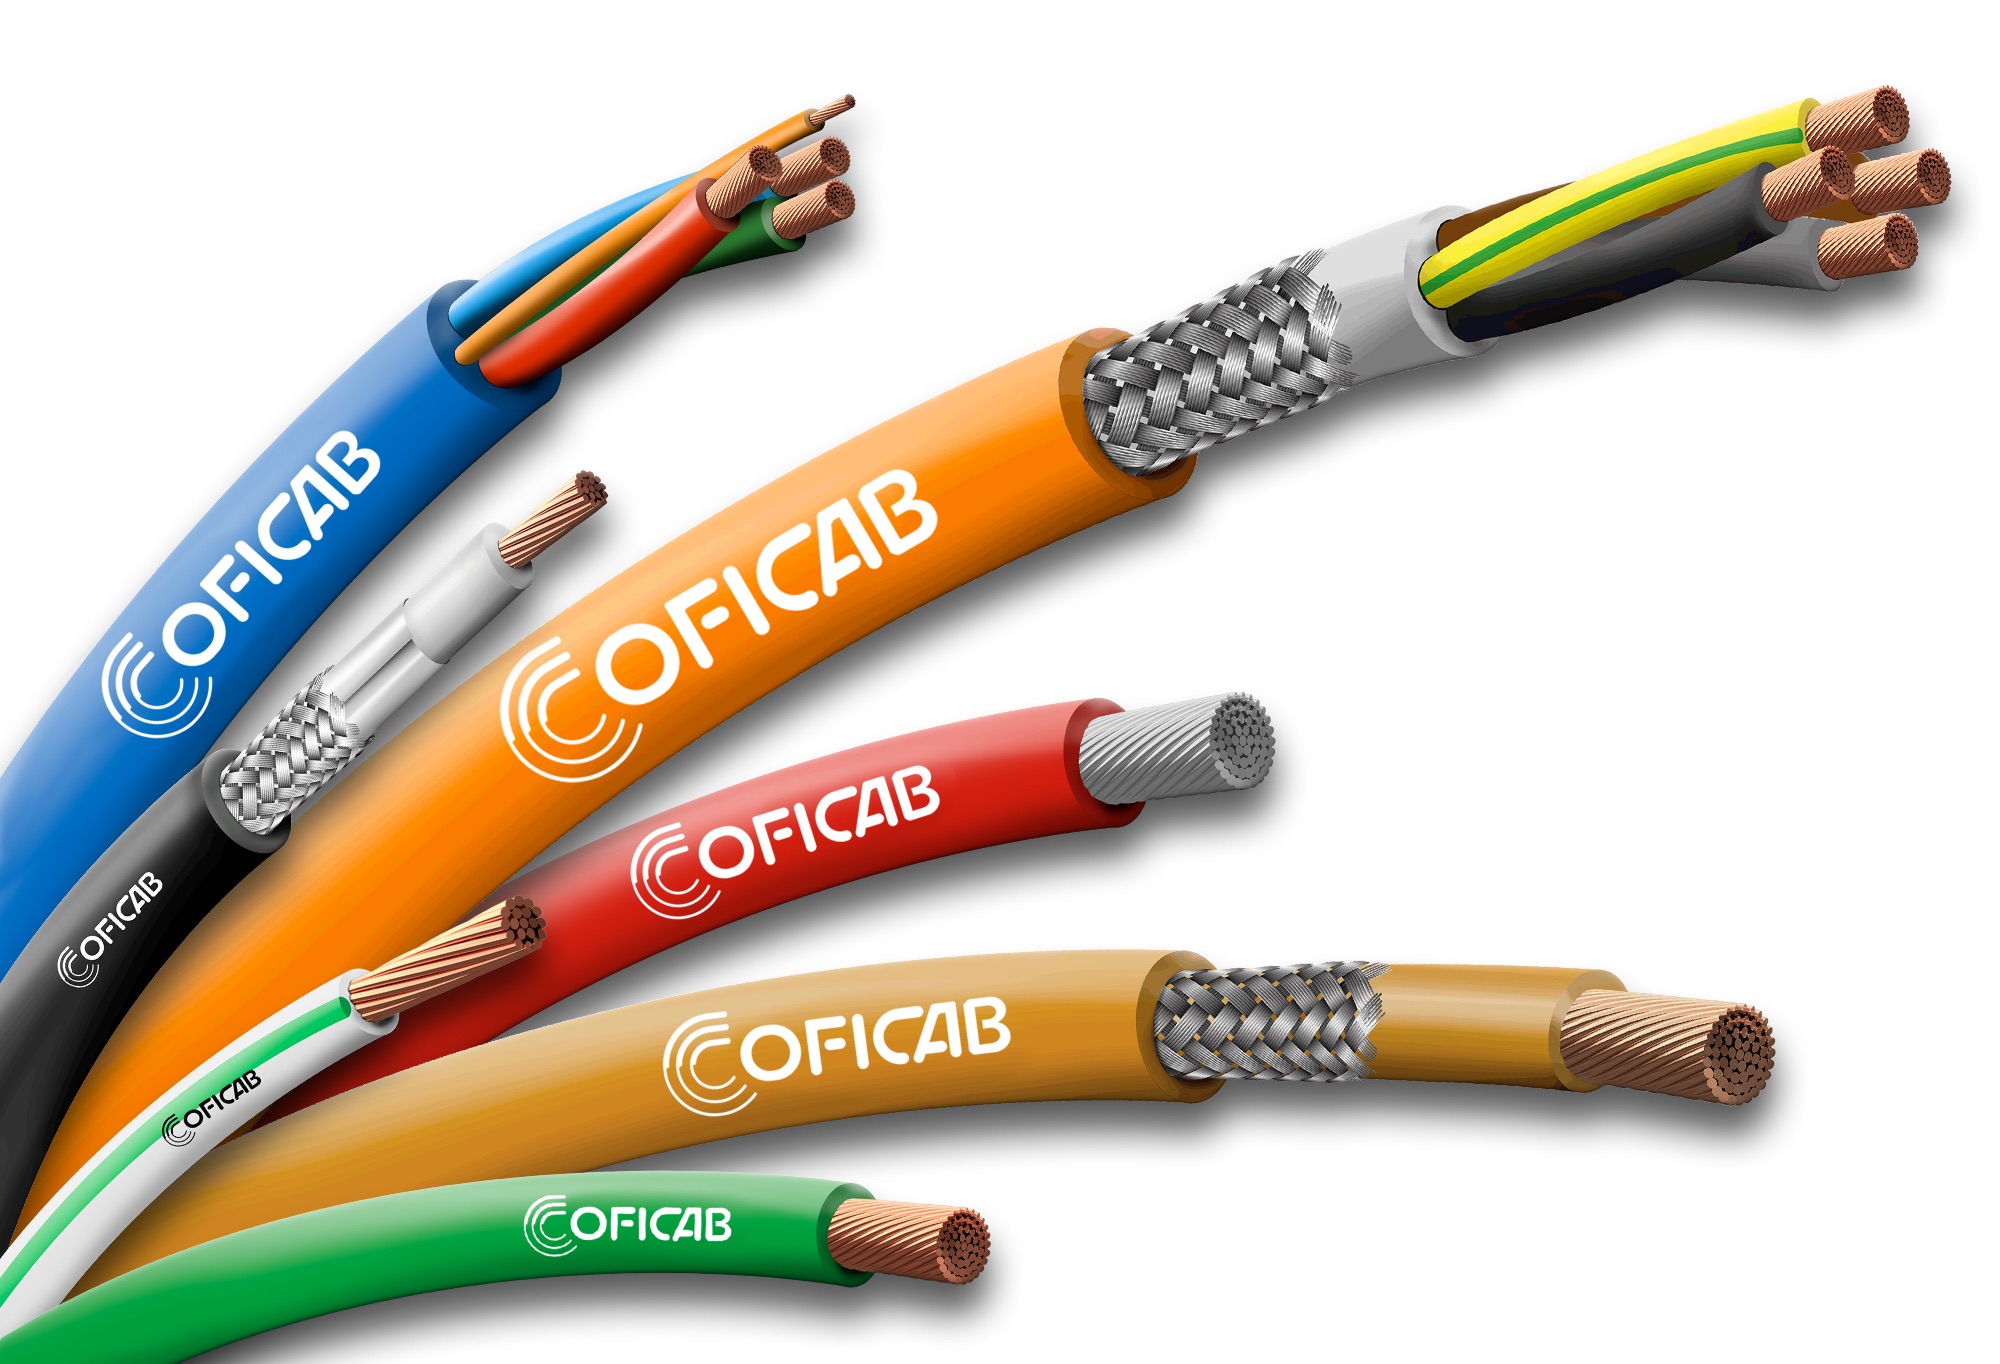 Cable assemblies from COFICAB and Power and Signal